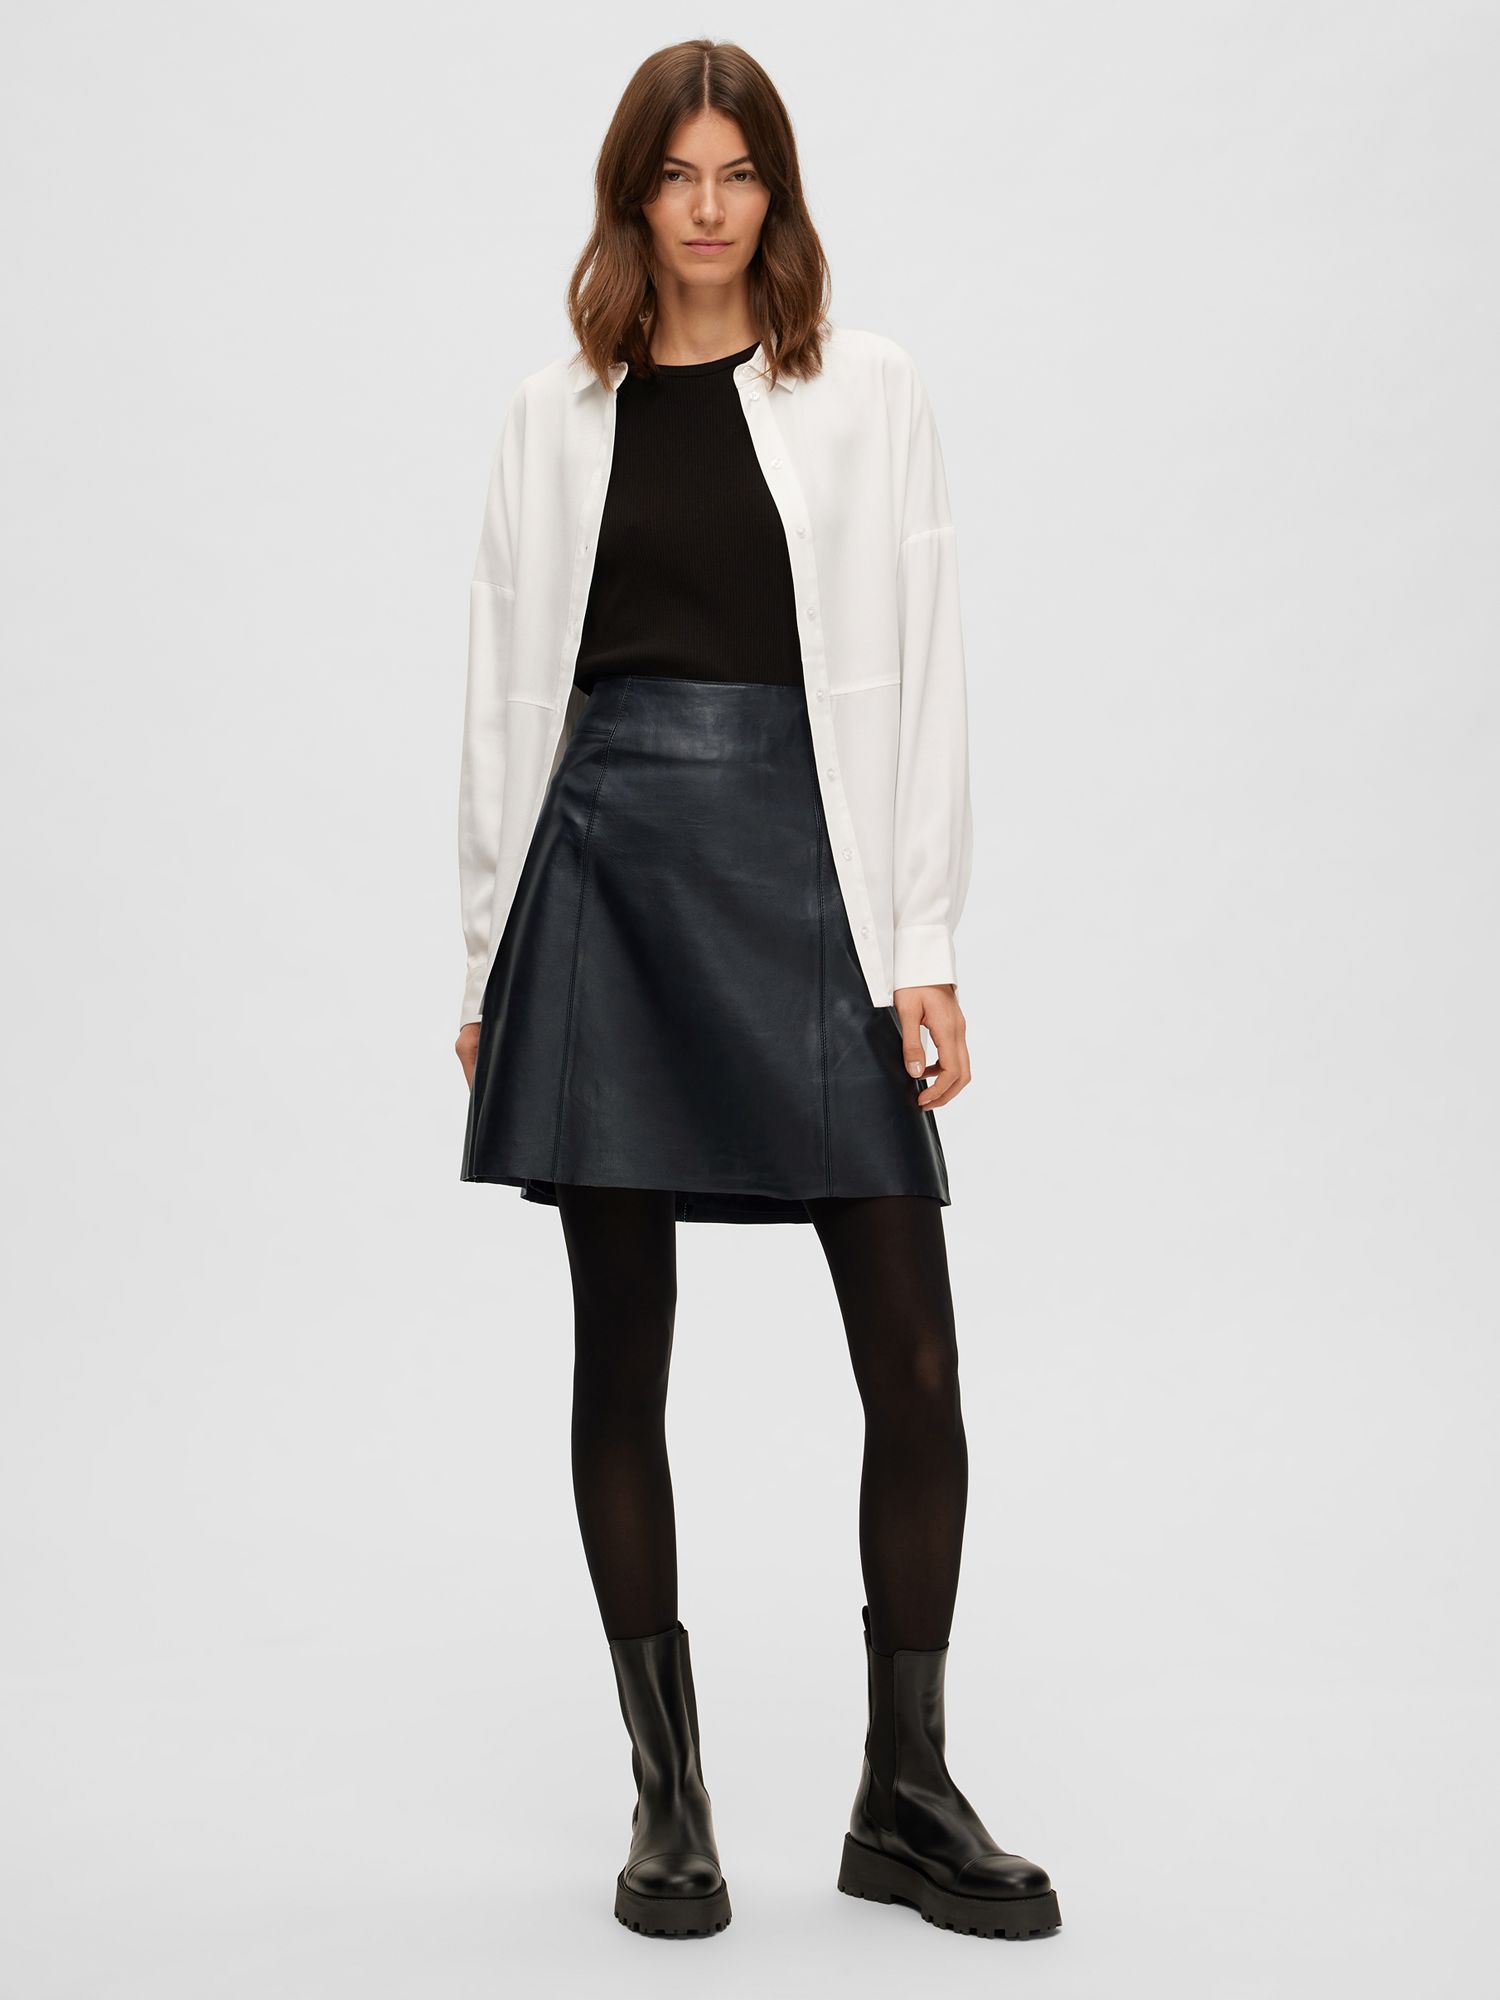 SELECTED FEMME Leather A-Line Skirt, Black at John Lewis & Partners